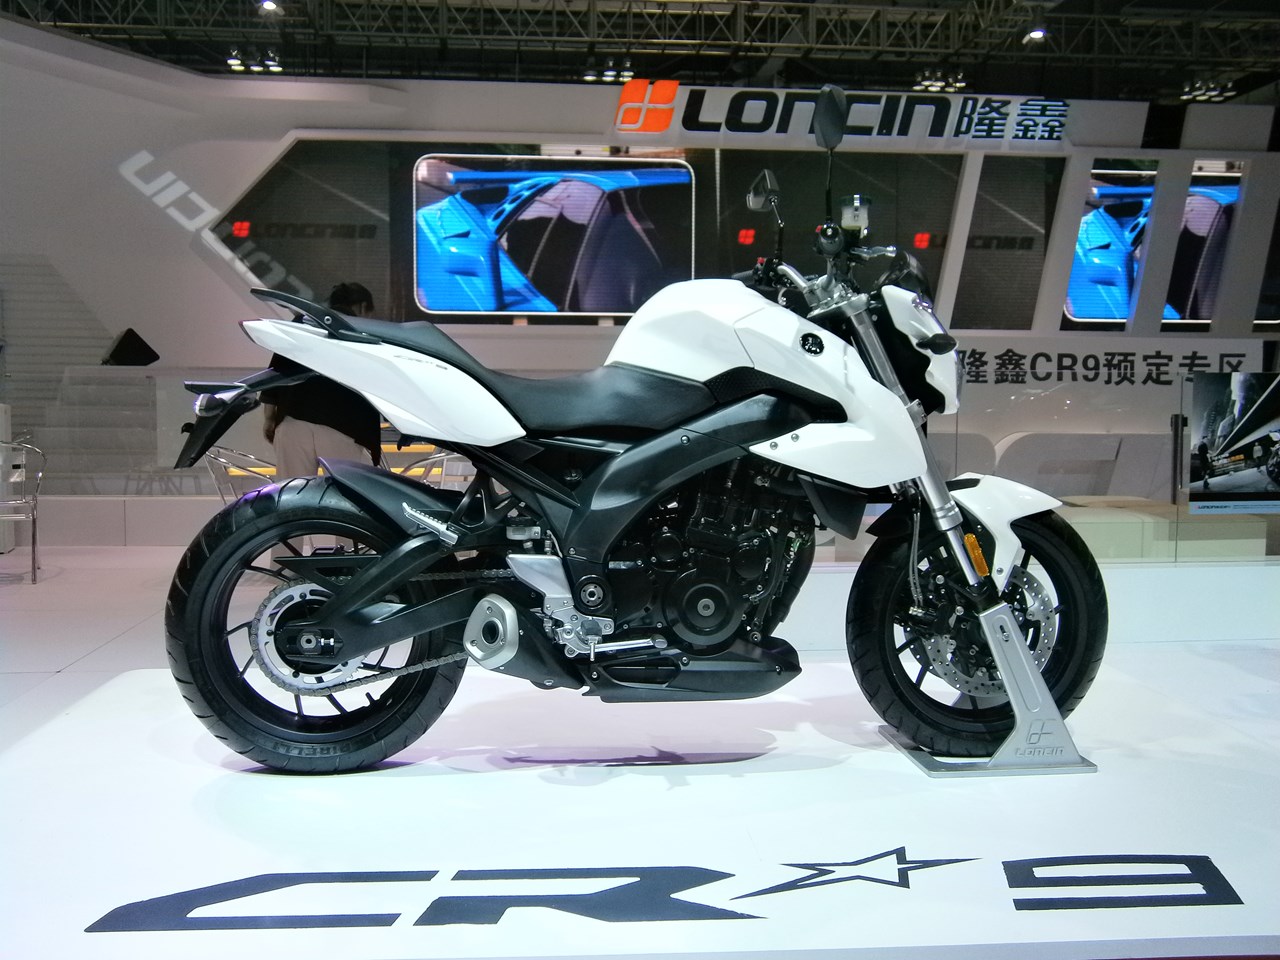 New Loncin uses BMW G650GS engine